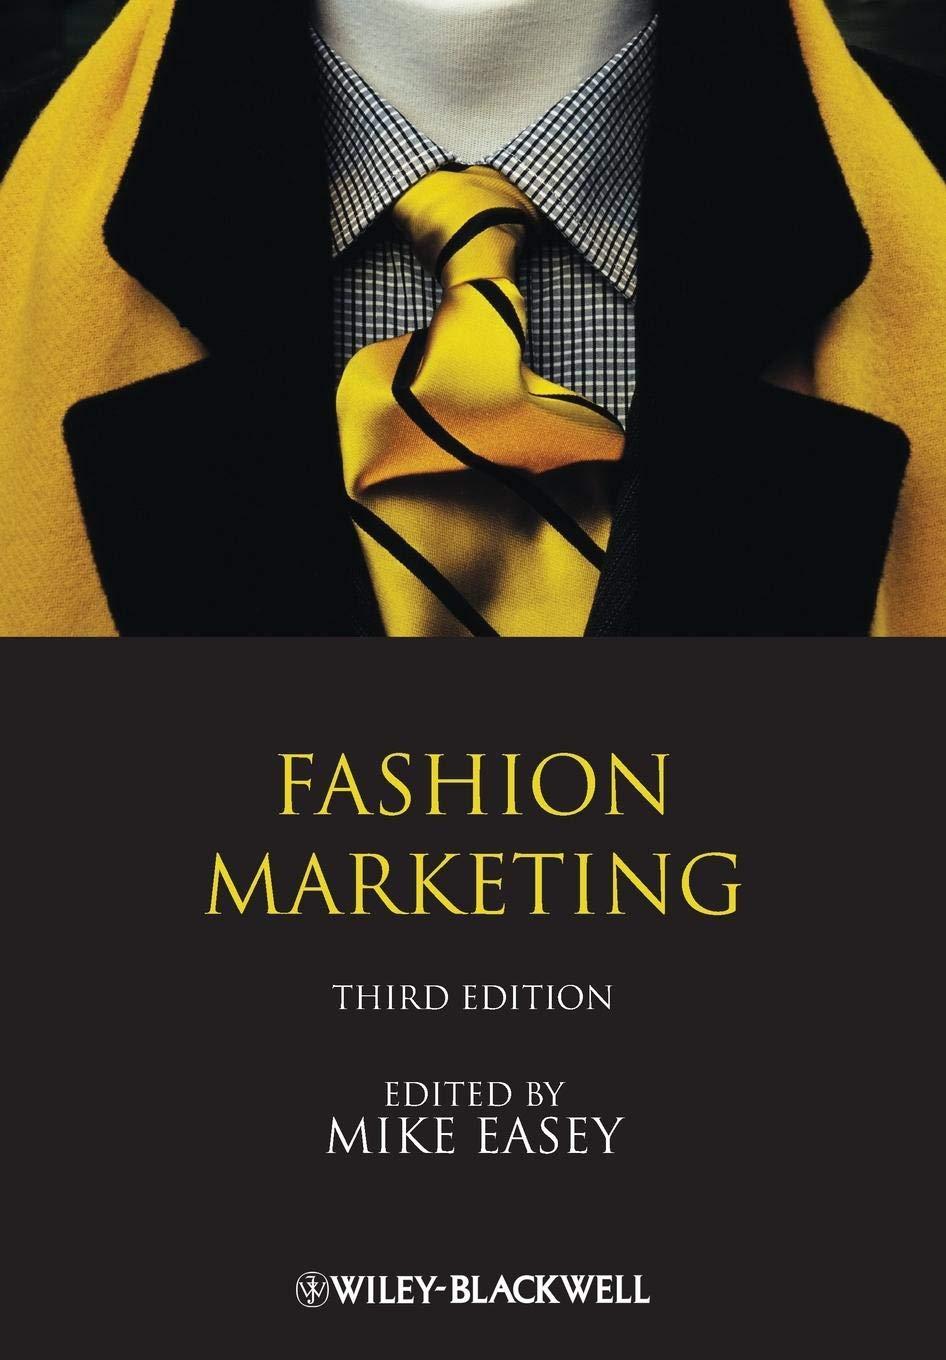 fashion marketing 3rd edition mike easey 1405139536, 978-1405139533